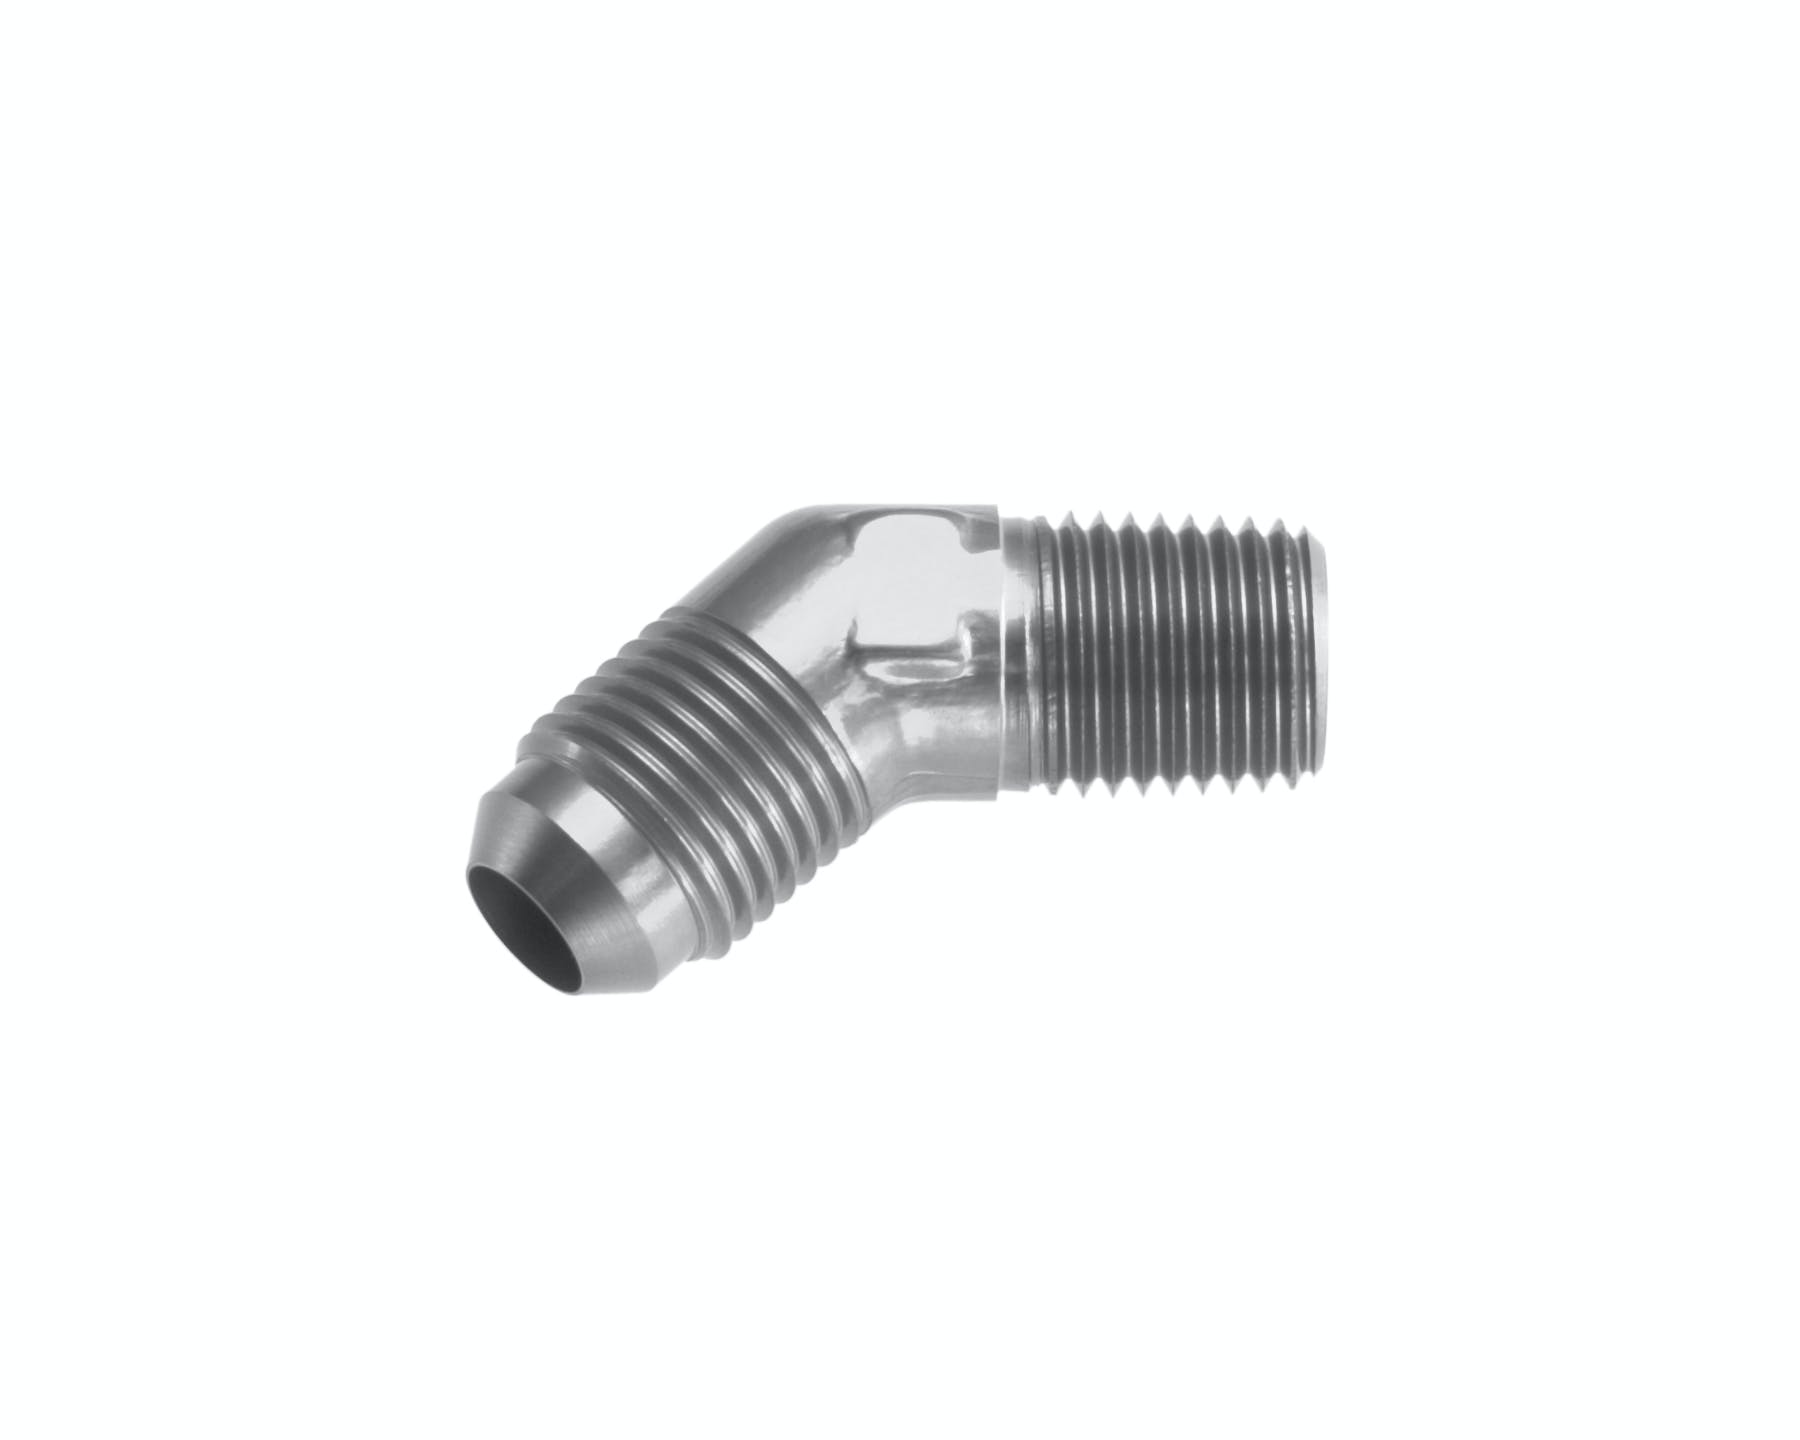 Redhorse Performance 823-12-08-5 -12 45 degree Male adapter to -08 (1/2in) NPT Male - clear